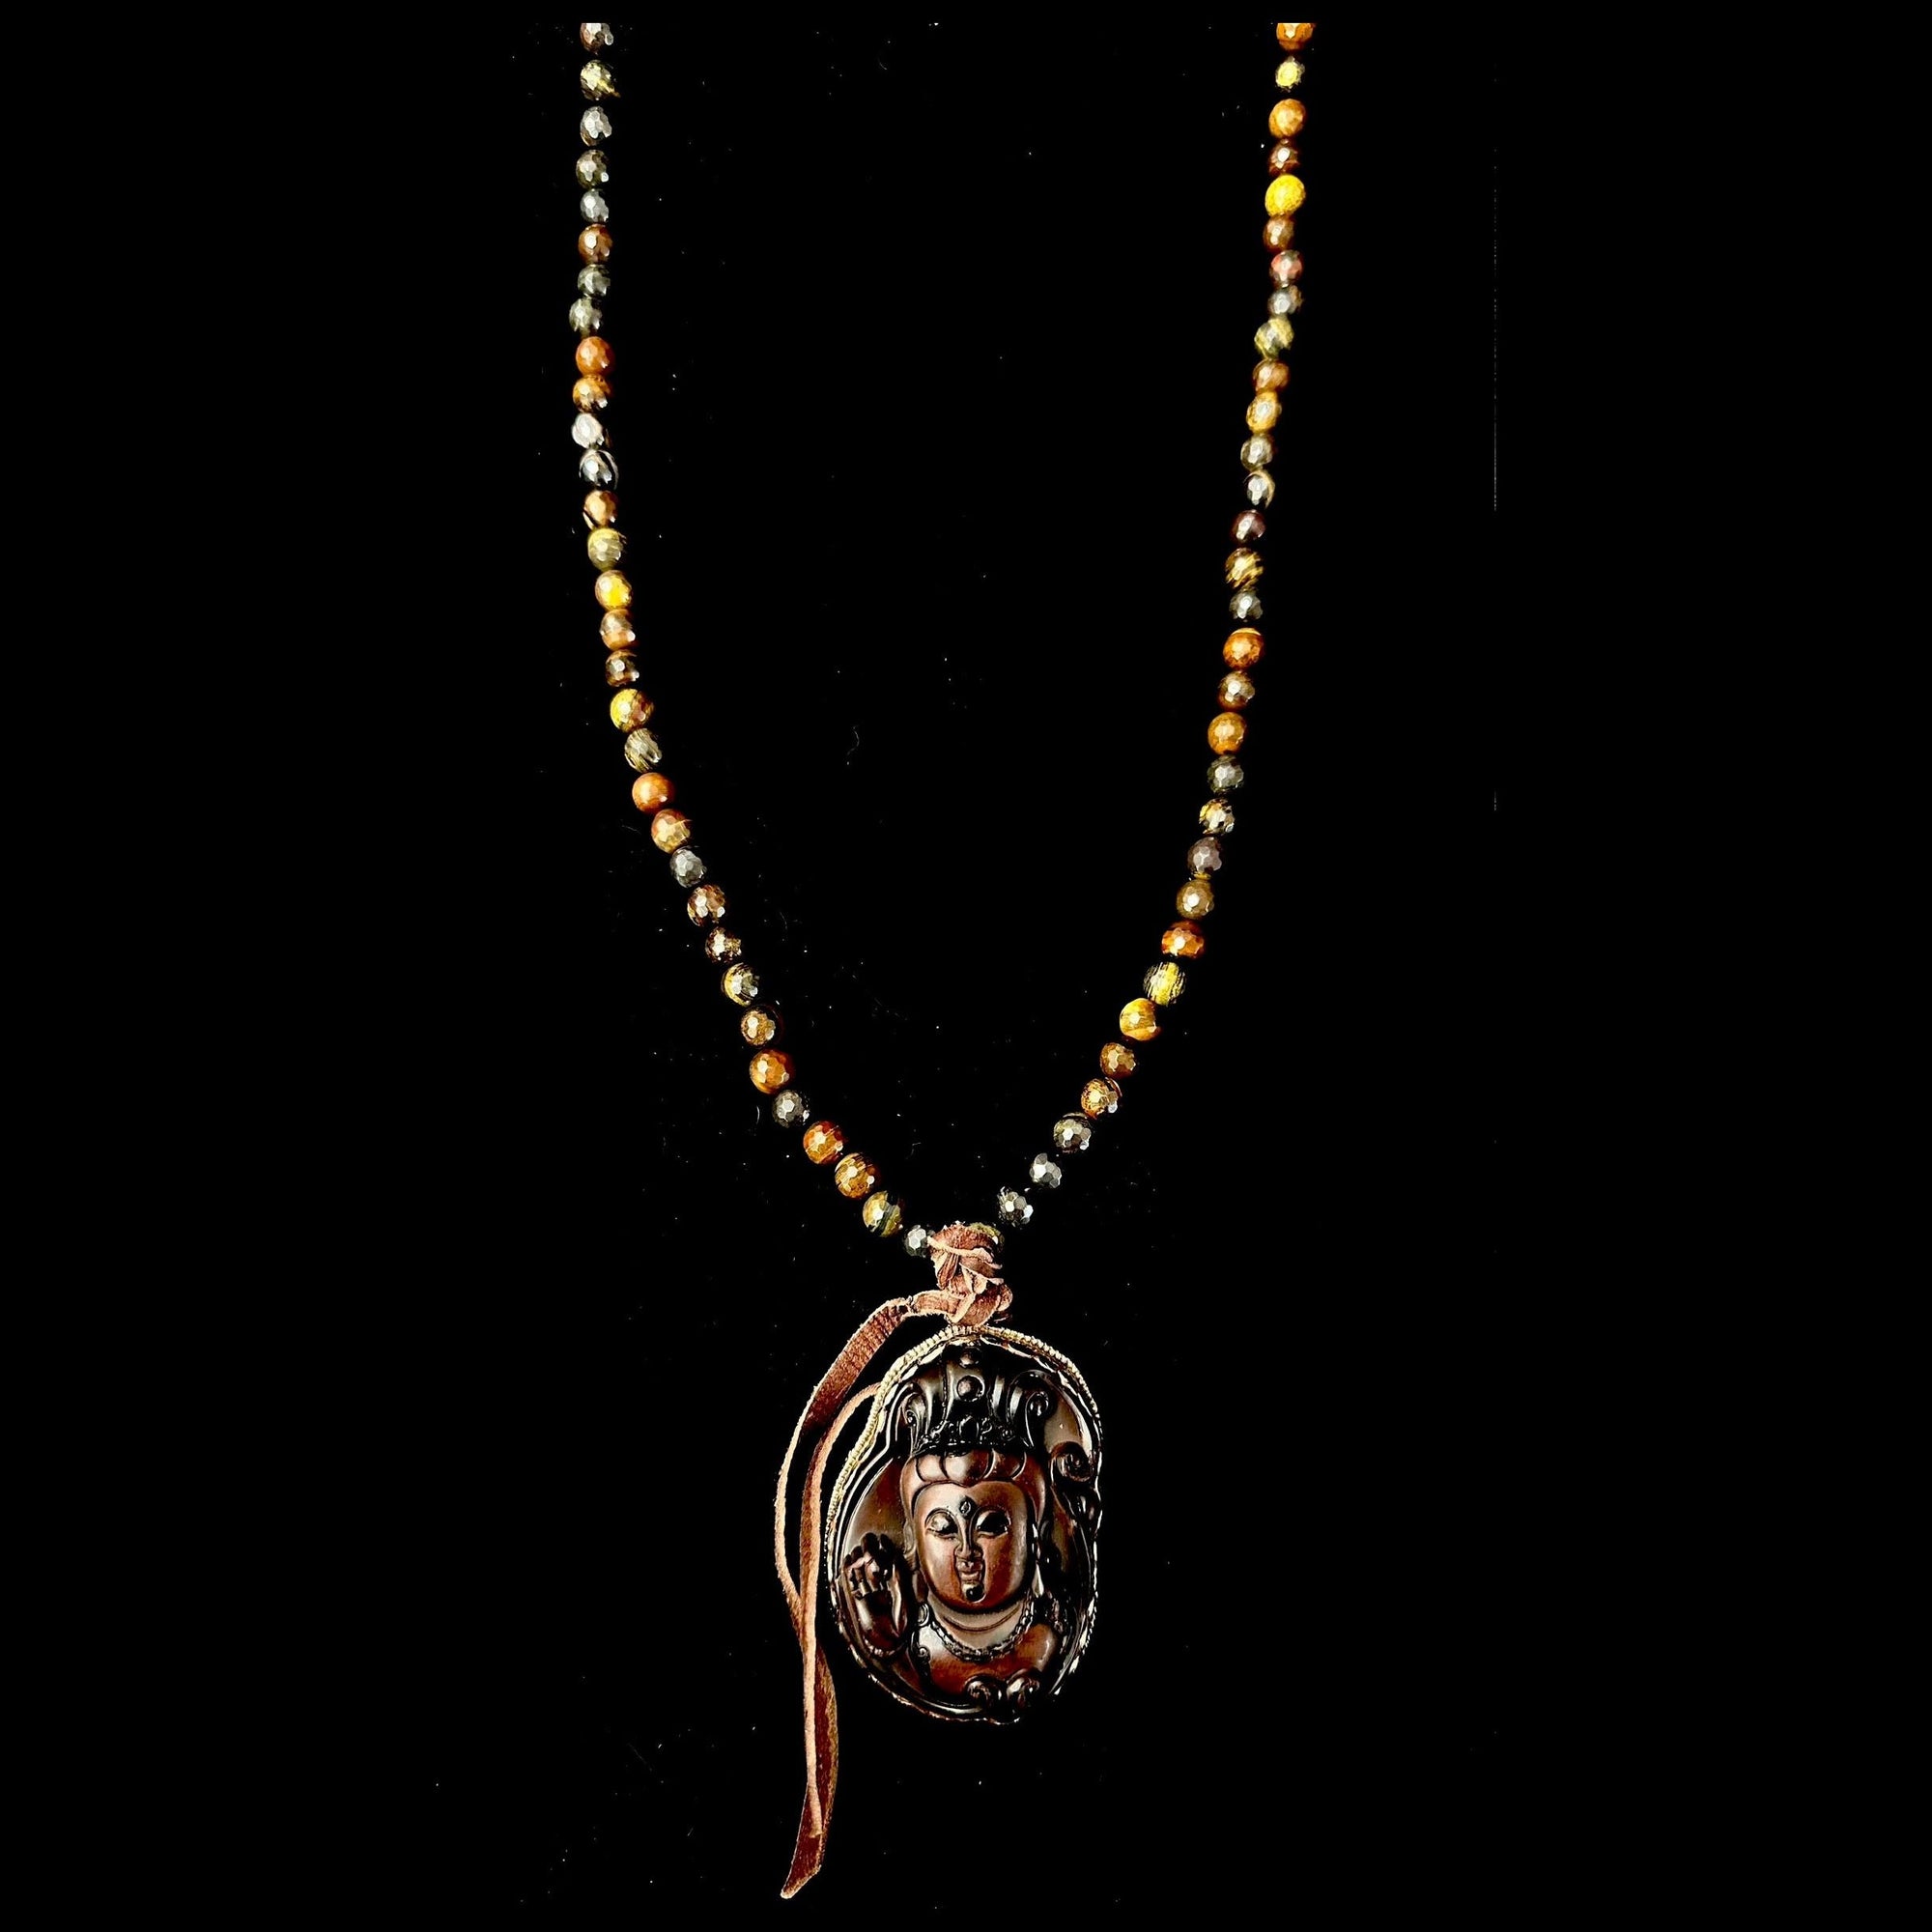 One of a Kind Kwan Yin the Goddess Tiger Eye Necklace